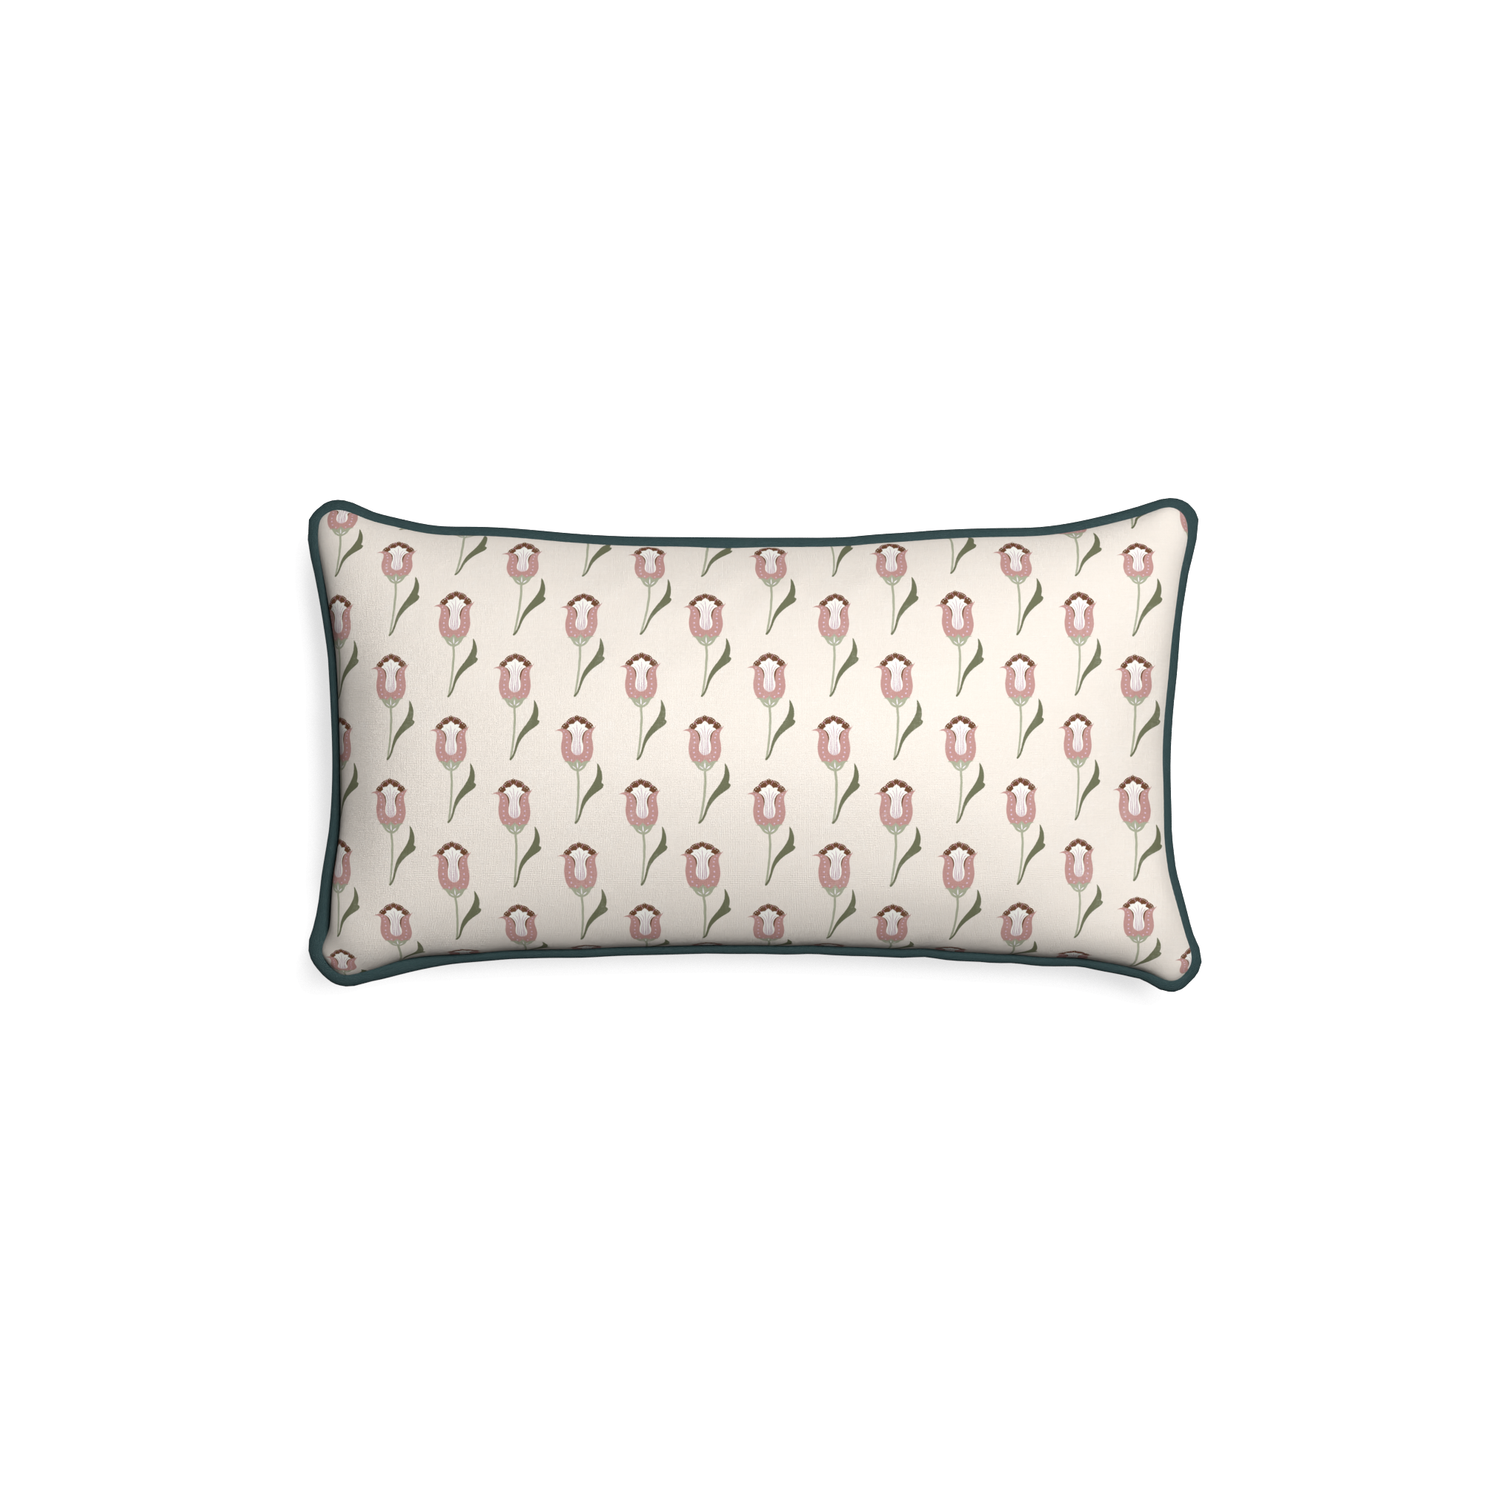 Petite-lumbar annabelle orchid custom pink tulippillow with p piping on white background